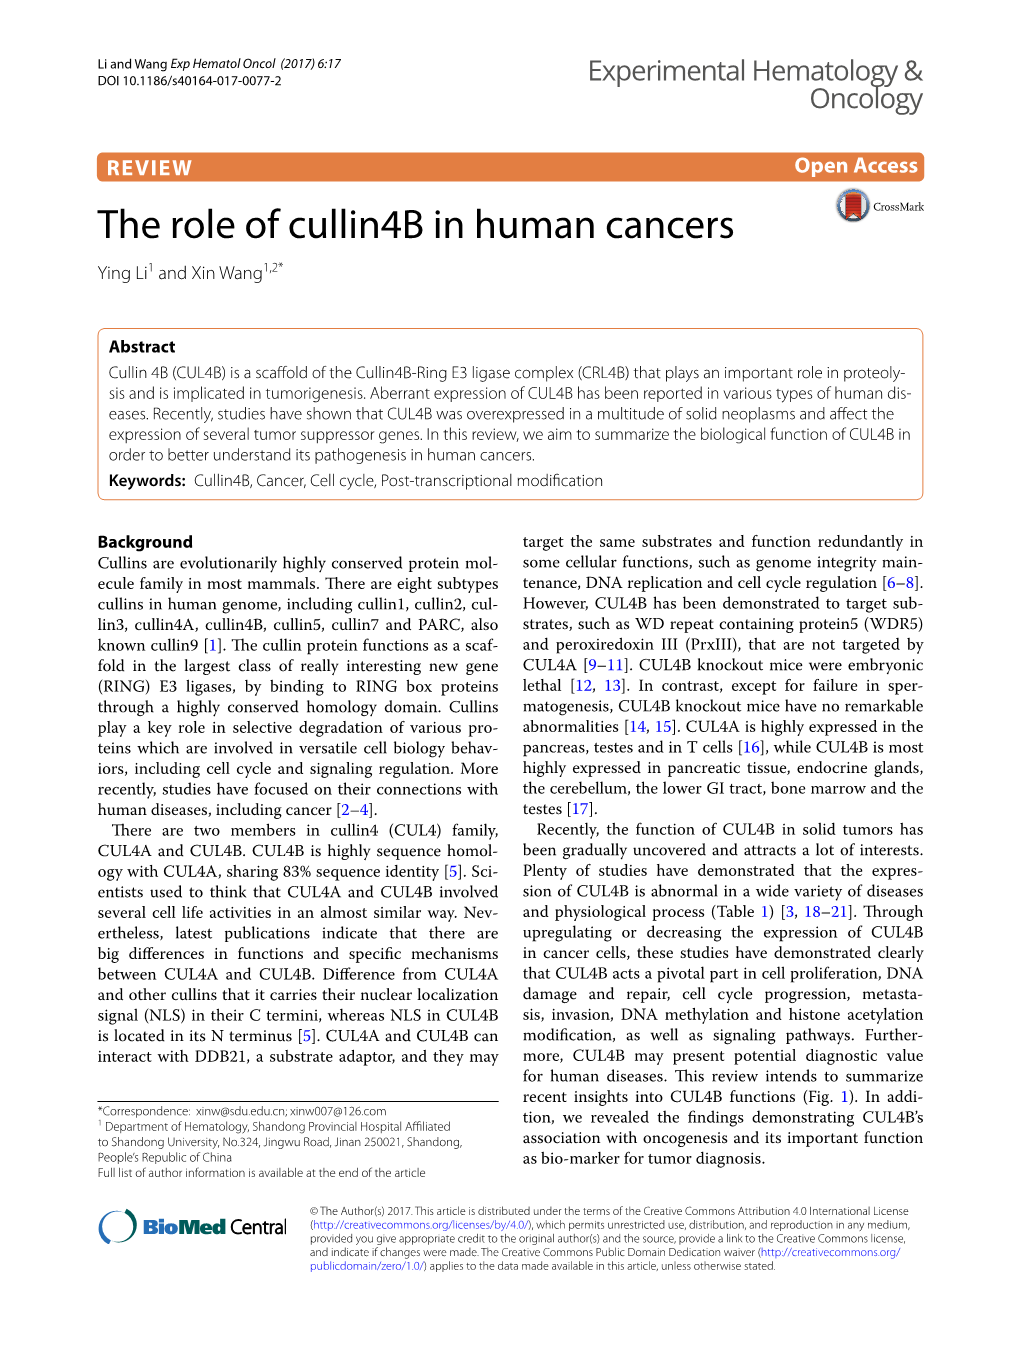 The Role of Cullin4b in Human Cancers Ying Li1 and Xin Wang1,2*